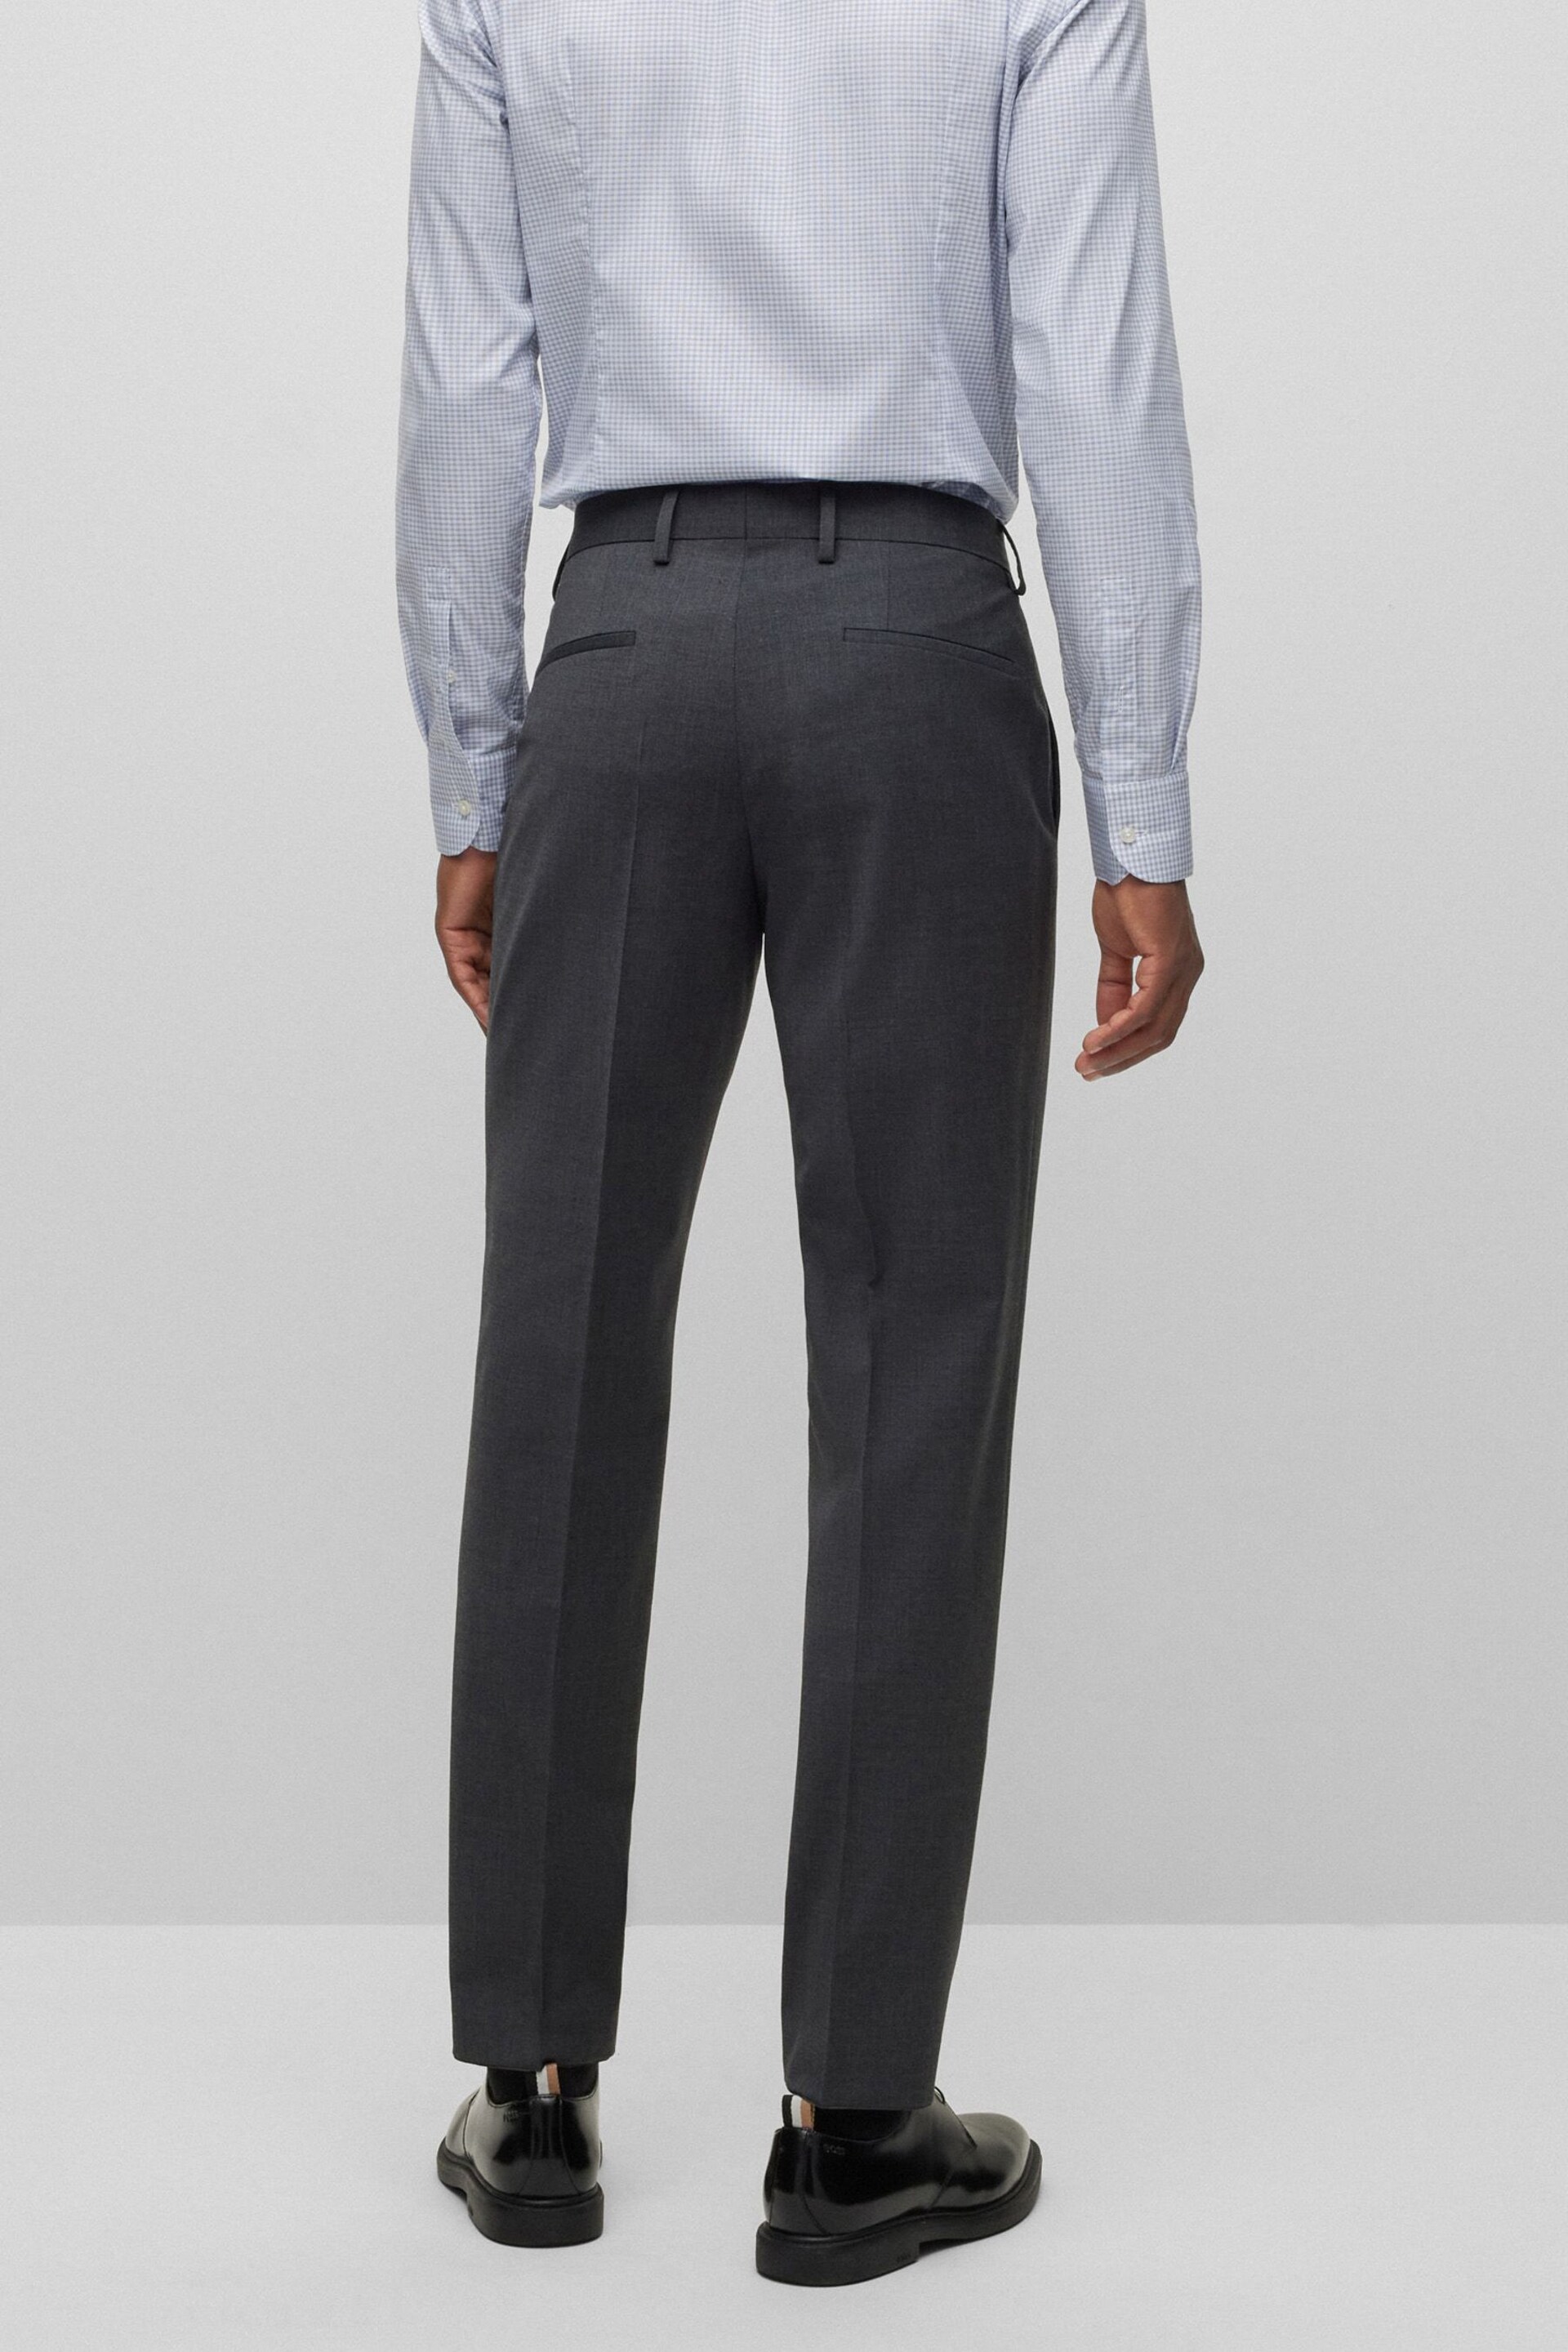 BOSS Grey Slim Fit Suit :Trousers - Image 3 of 6